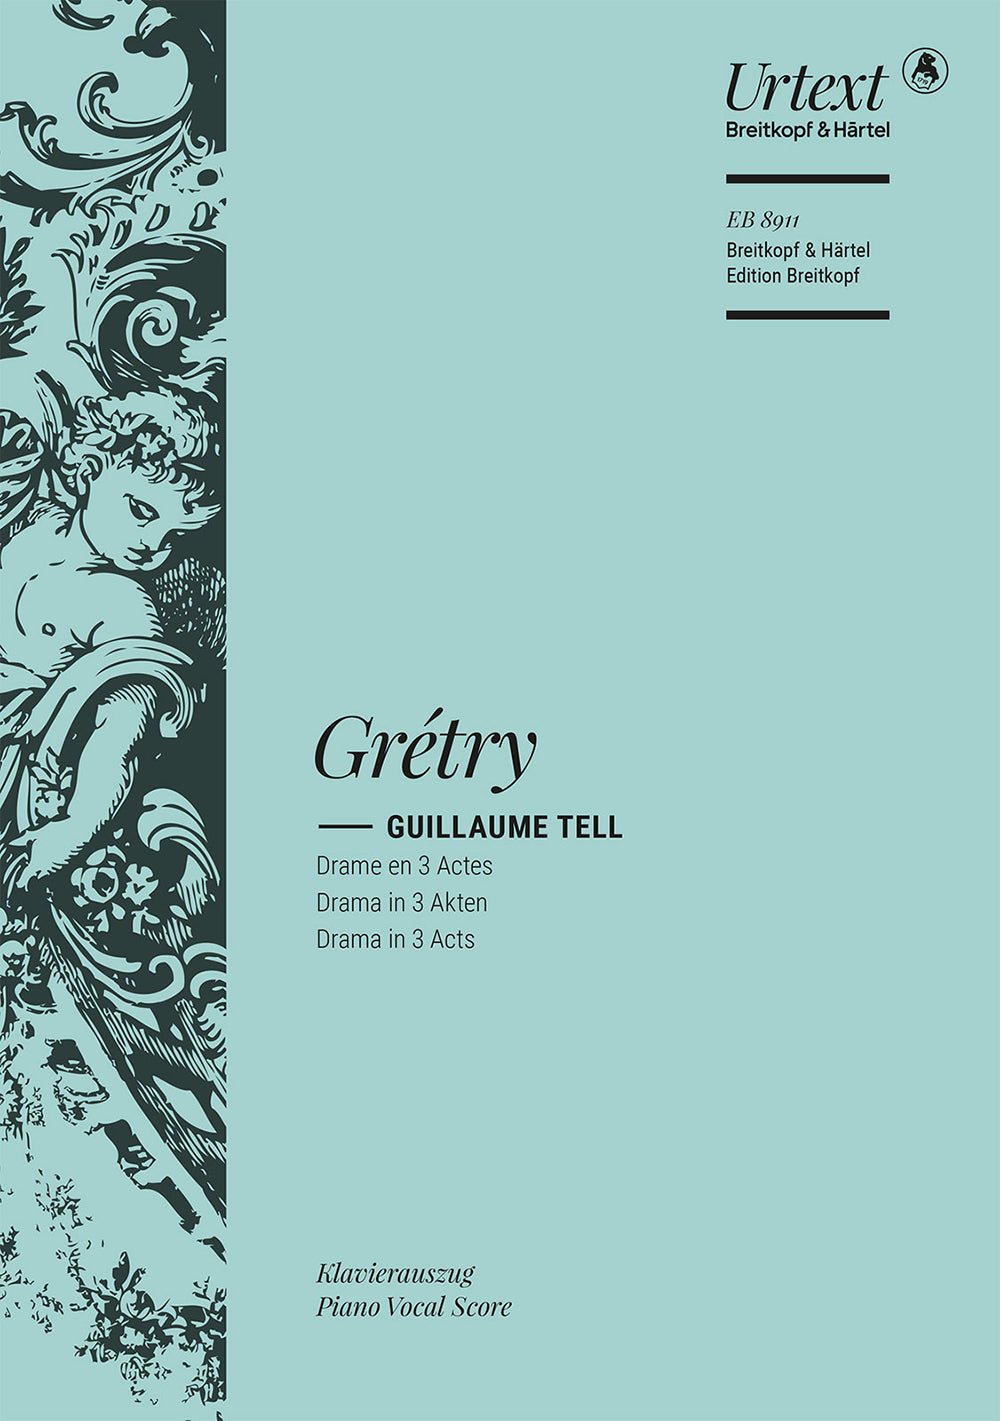 Gretry: Guillaume Tell vocal score